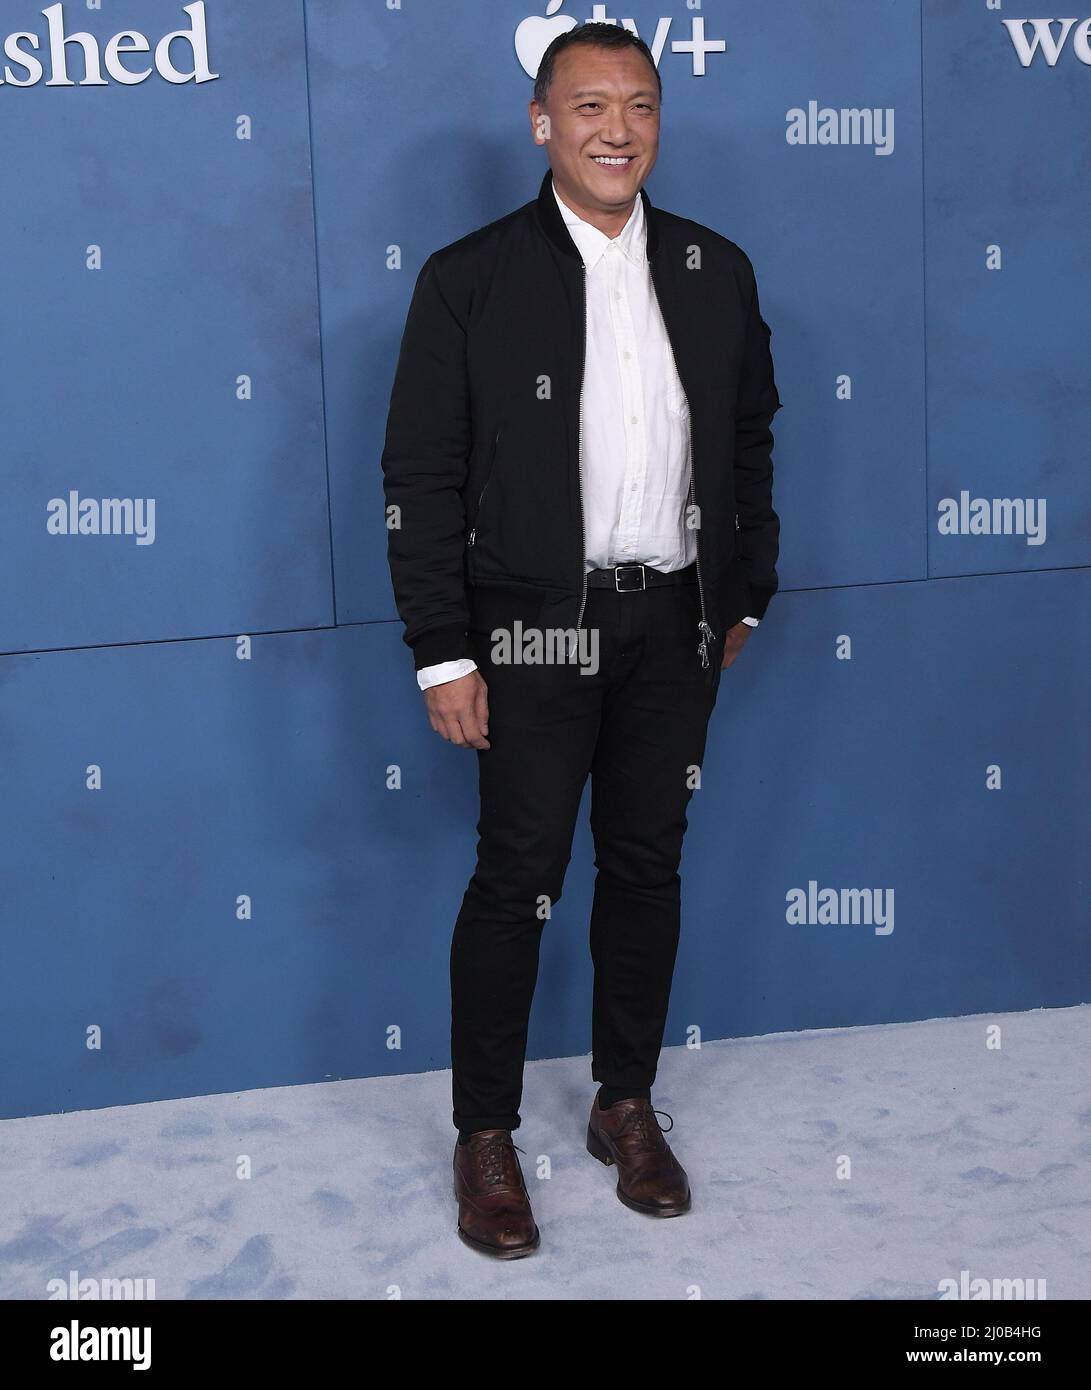 Los Angeles, USA. 17th Mar, 2022. Joe Zee arrives at Apple TV 's WECRASHED Los Angeles Premiere held at The Academy Museum in Los Angeles, CA on Thursday, ?March 17, 2022. (Photo By Sthanlee B. Mirador/Sipa USA) Credit: Sipa USA/Alamy Live News Stock Photo